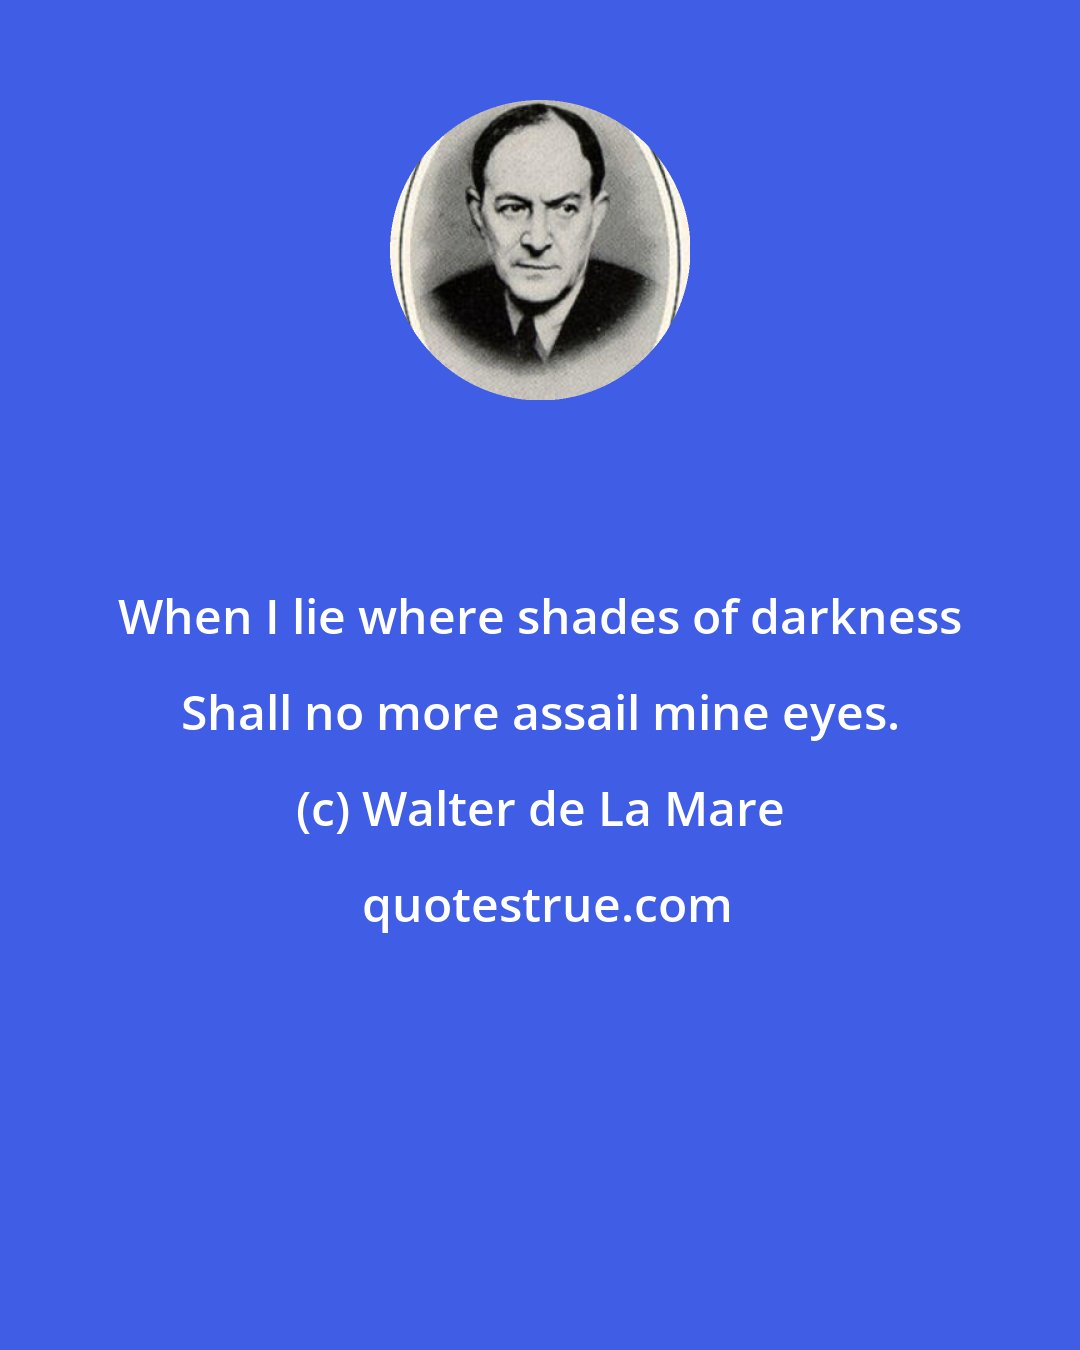 Walter de La Mare: When I lie where shades of darkness Shall no more assail mine eyes.